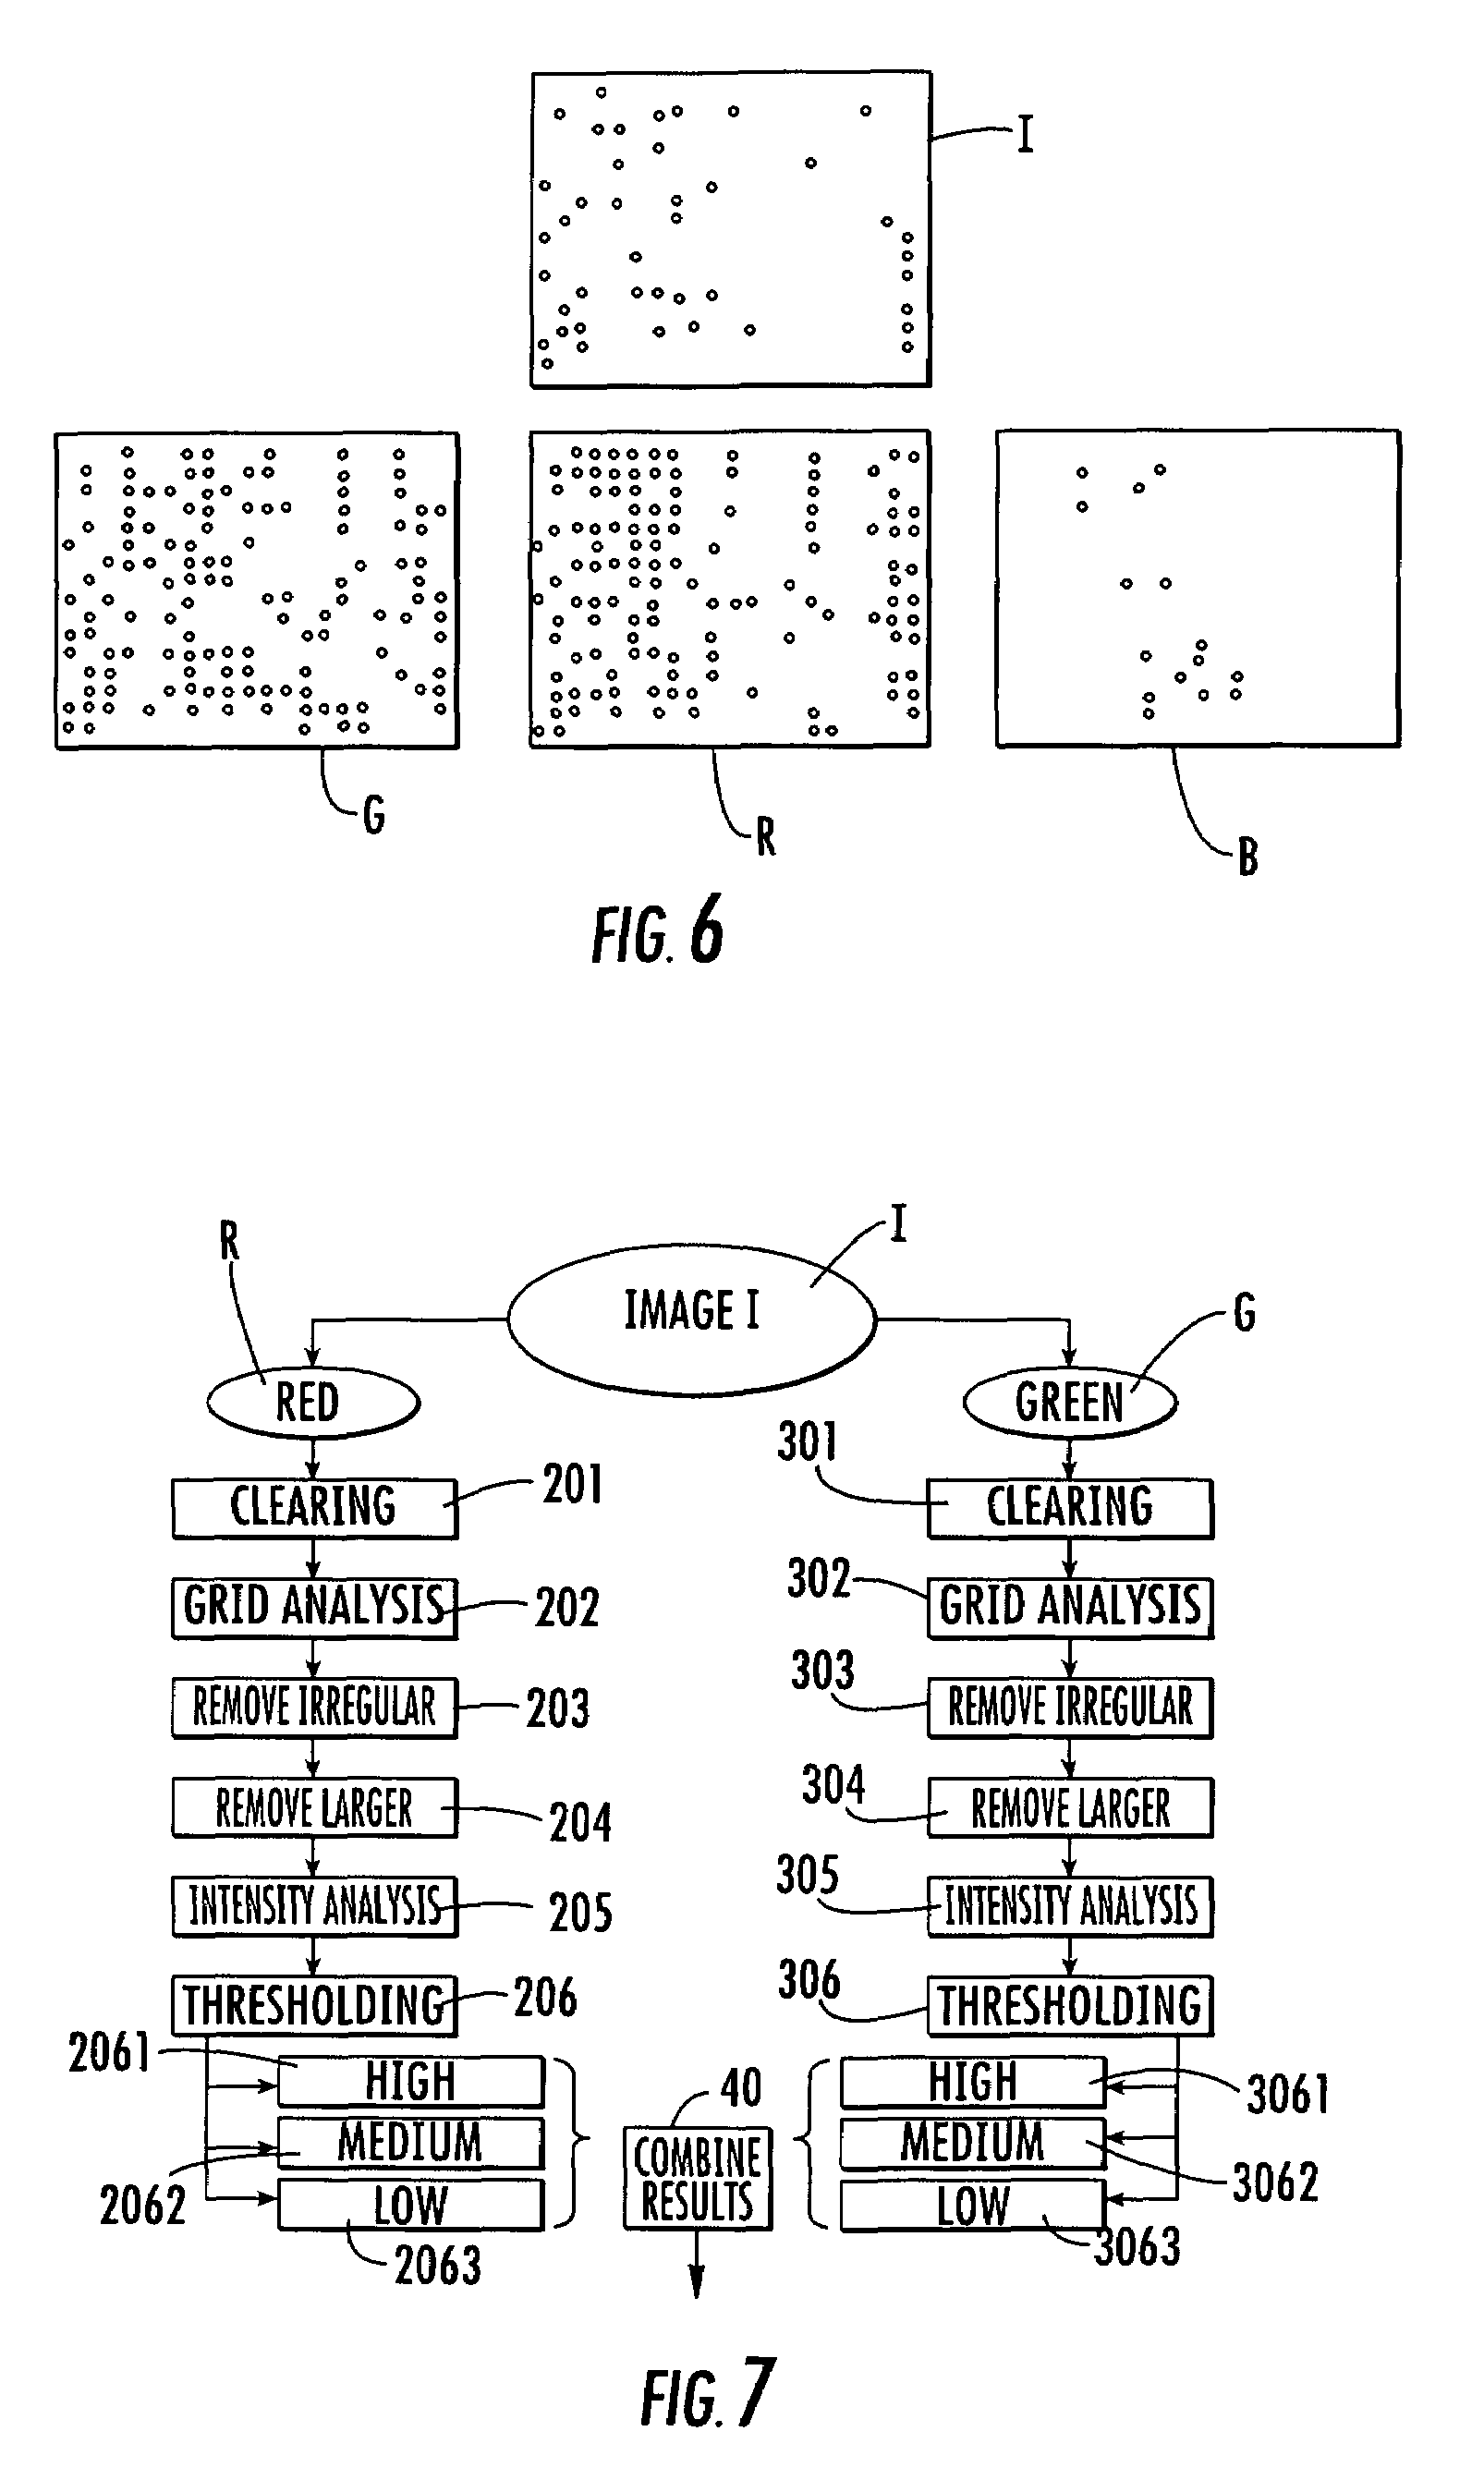 System for the automatic analysis of images such as DNA microarray images